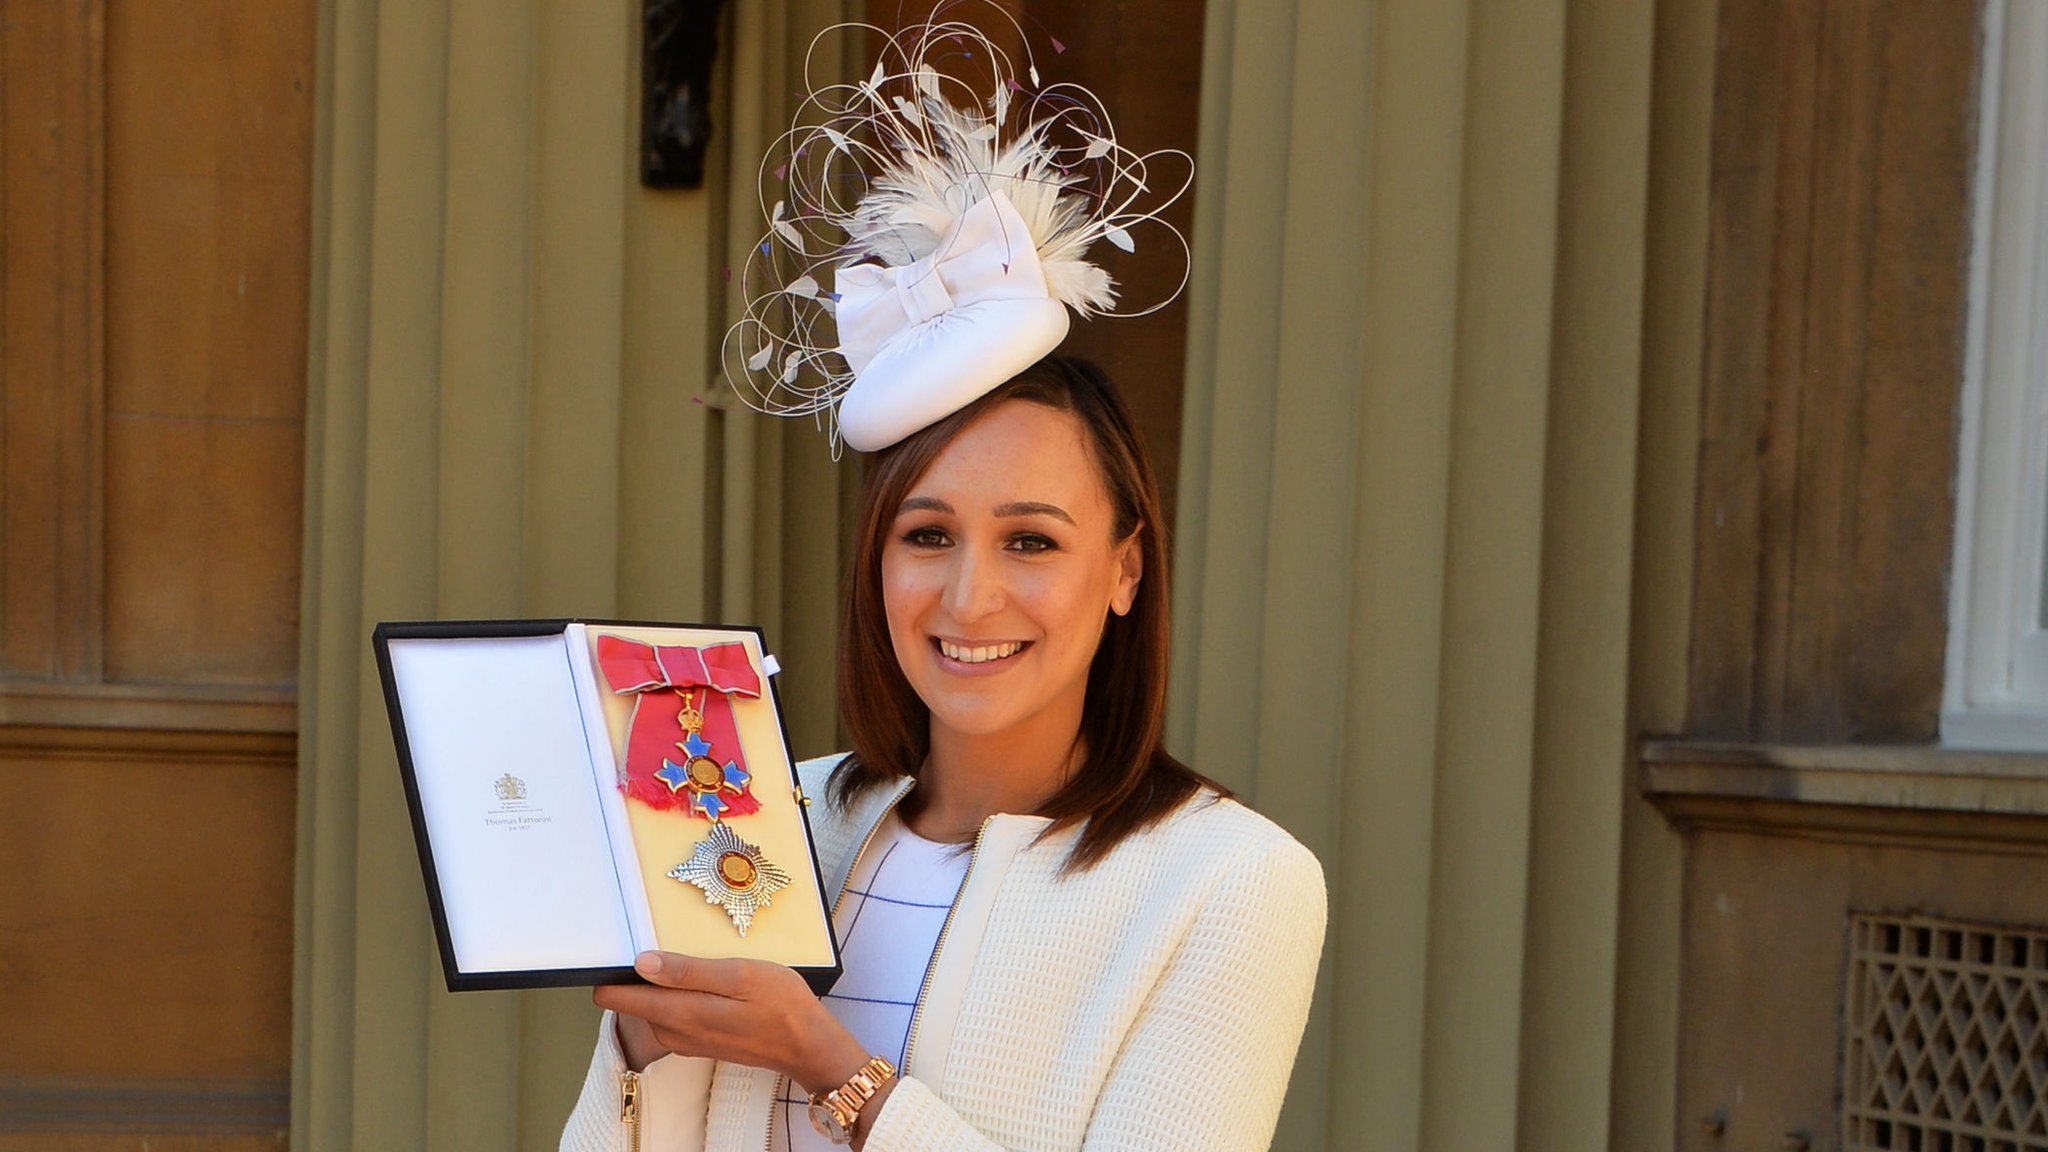 Jessica Ennis-Hill was made a Dame at the ceremony